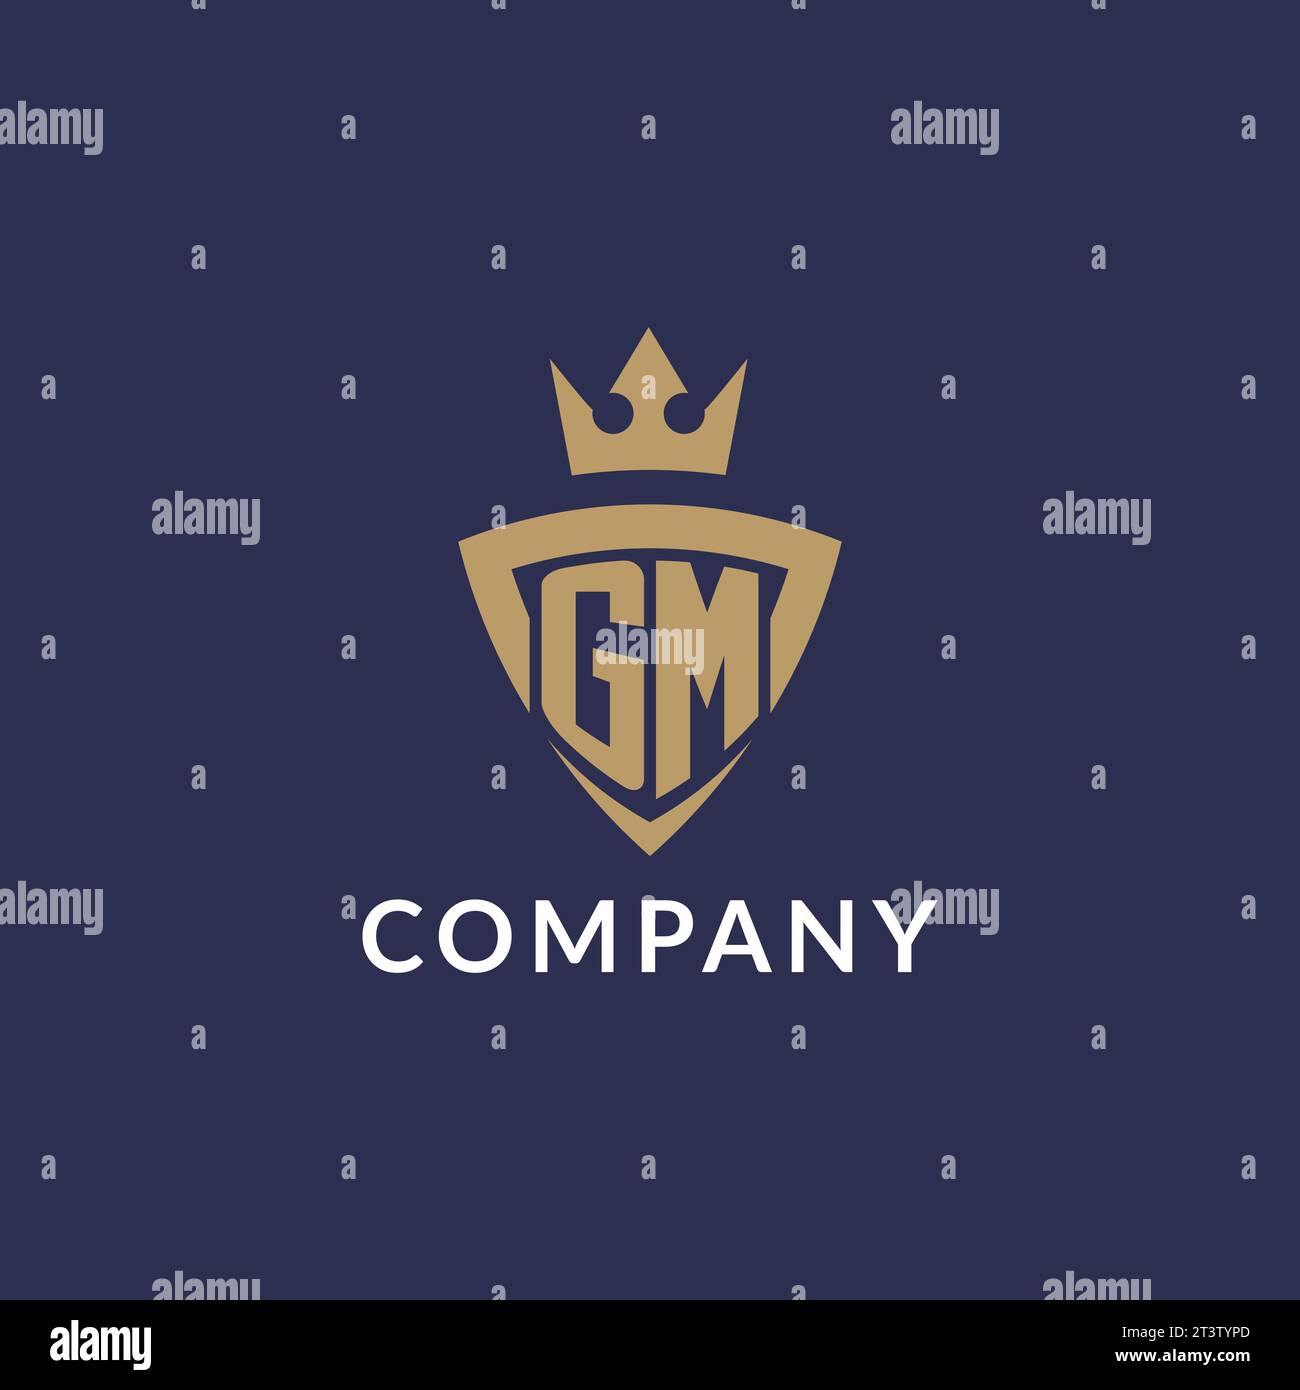 Gm logo monogram isolated with shield and crown Vector Image